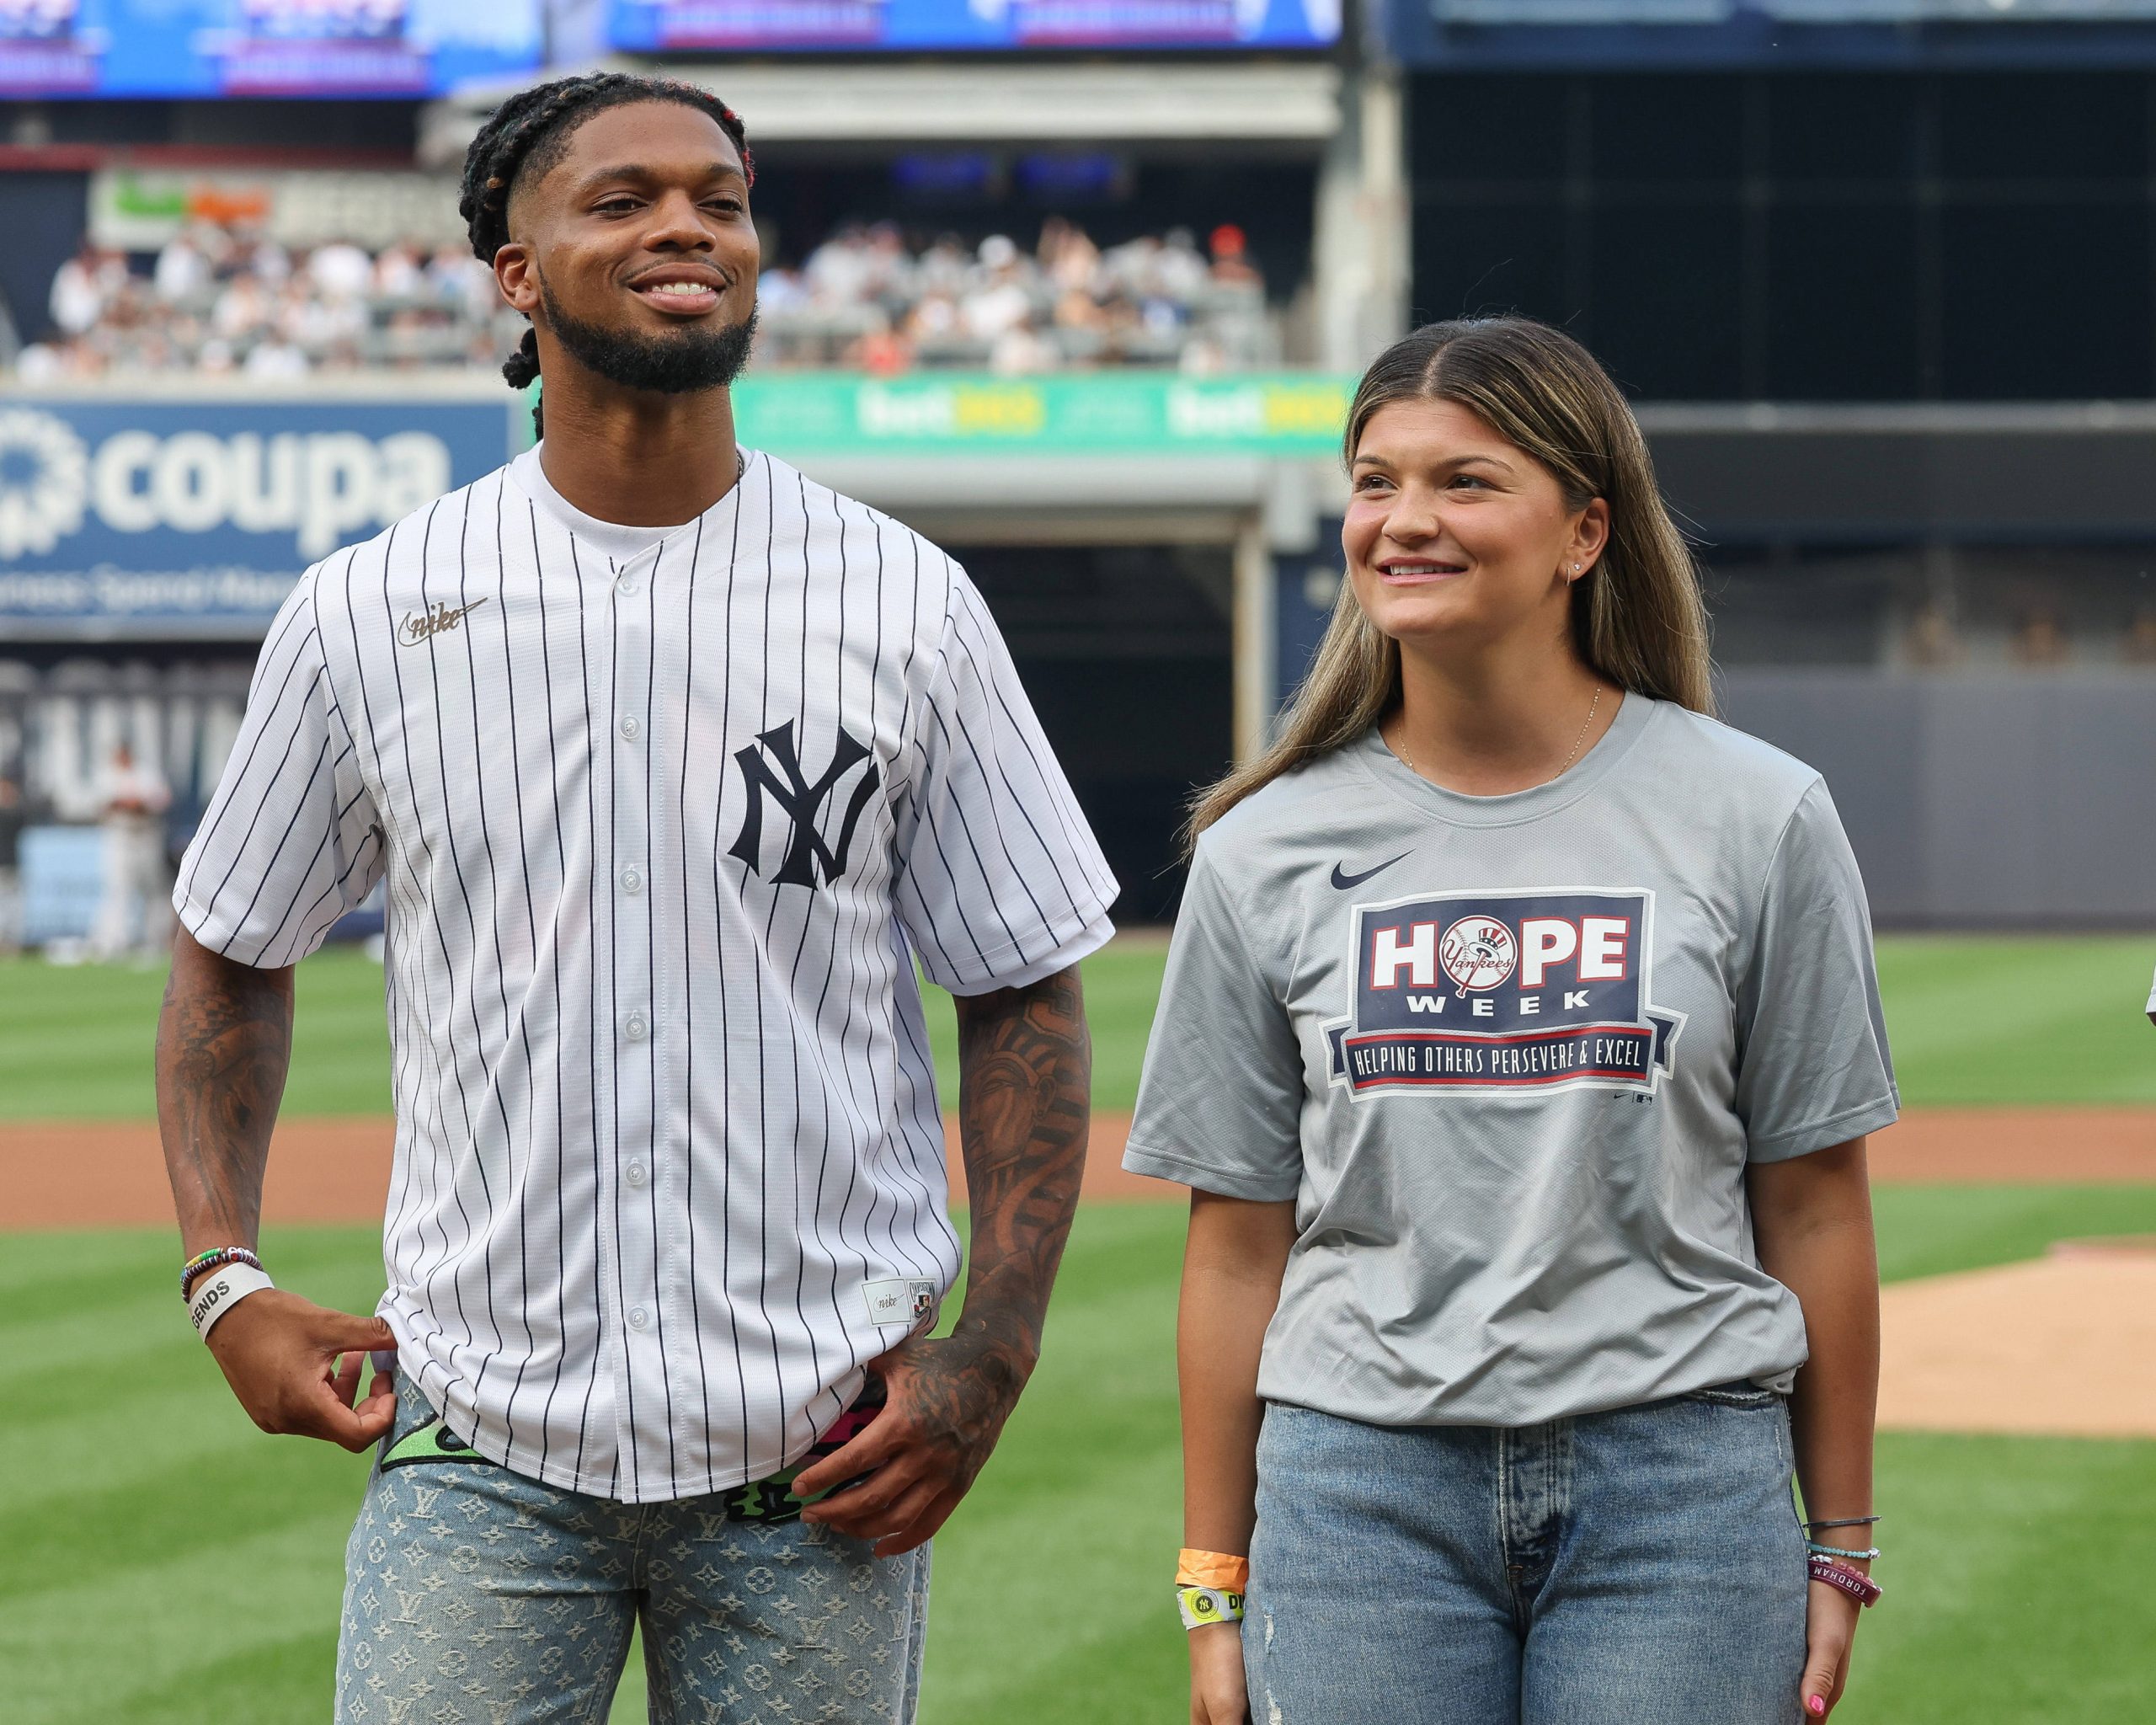 MLB, Baseball Herren, USA Baltimore Orioles at New York Yankees Jul 3, 2023 Bronx, New York, USA Buffalo Bills safety Damar Hamlin and Fordham softball player Sarah Taffet are honored by the New York Yankees as part of HOPE Week before the game between the New York Yankees and the Baltimore Orioles at Yankee Stadium. Bronx Yankee Stadium New York USA, EDITORIAL USE ONLY PUBLICATIONxINxGERxSUIxAUTxONLY Copyright: xVincentxCarchiettax 20230703_gav_cb6_067